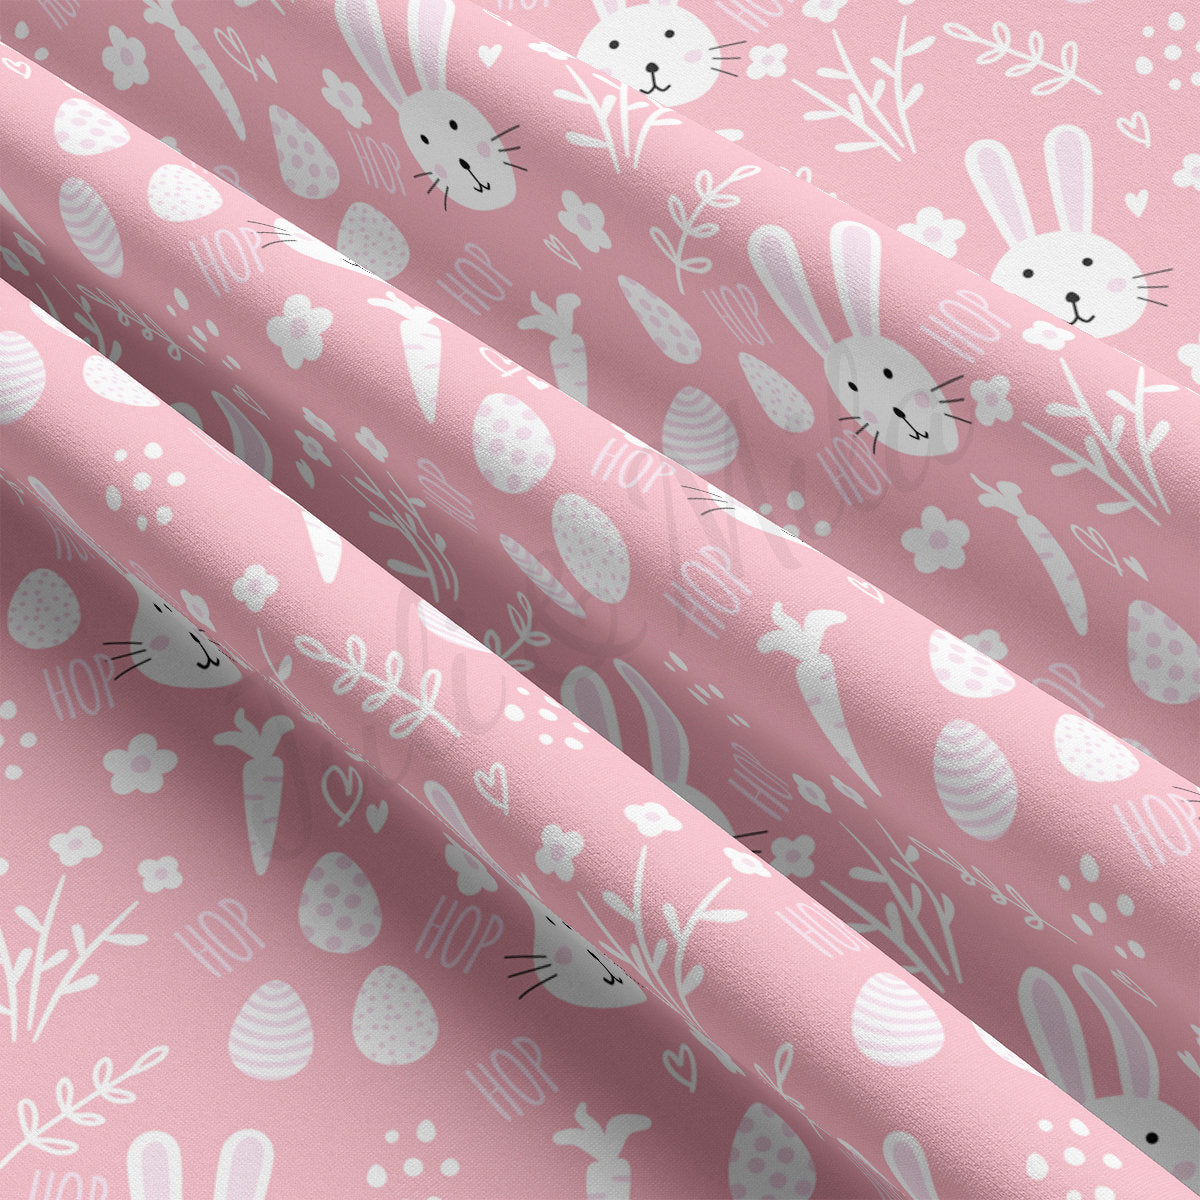 DBP Fabric Double Brushed Polyester DBP2536 Easter